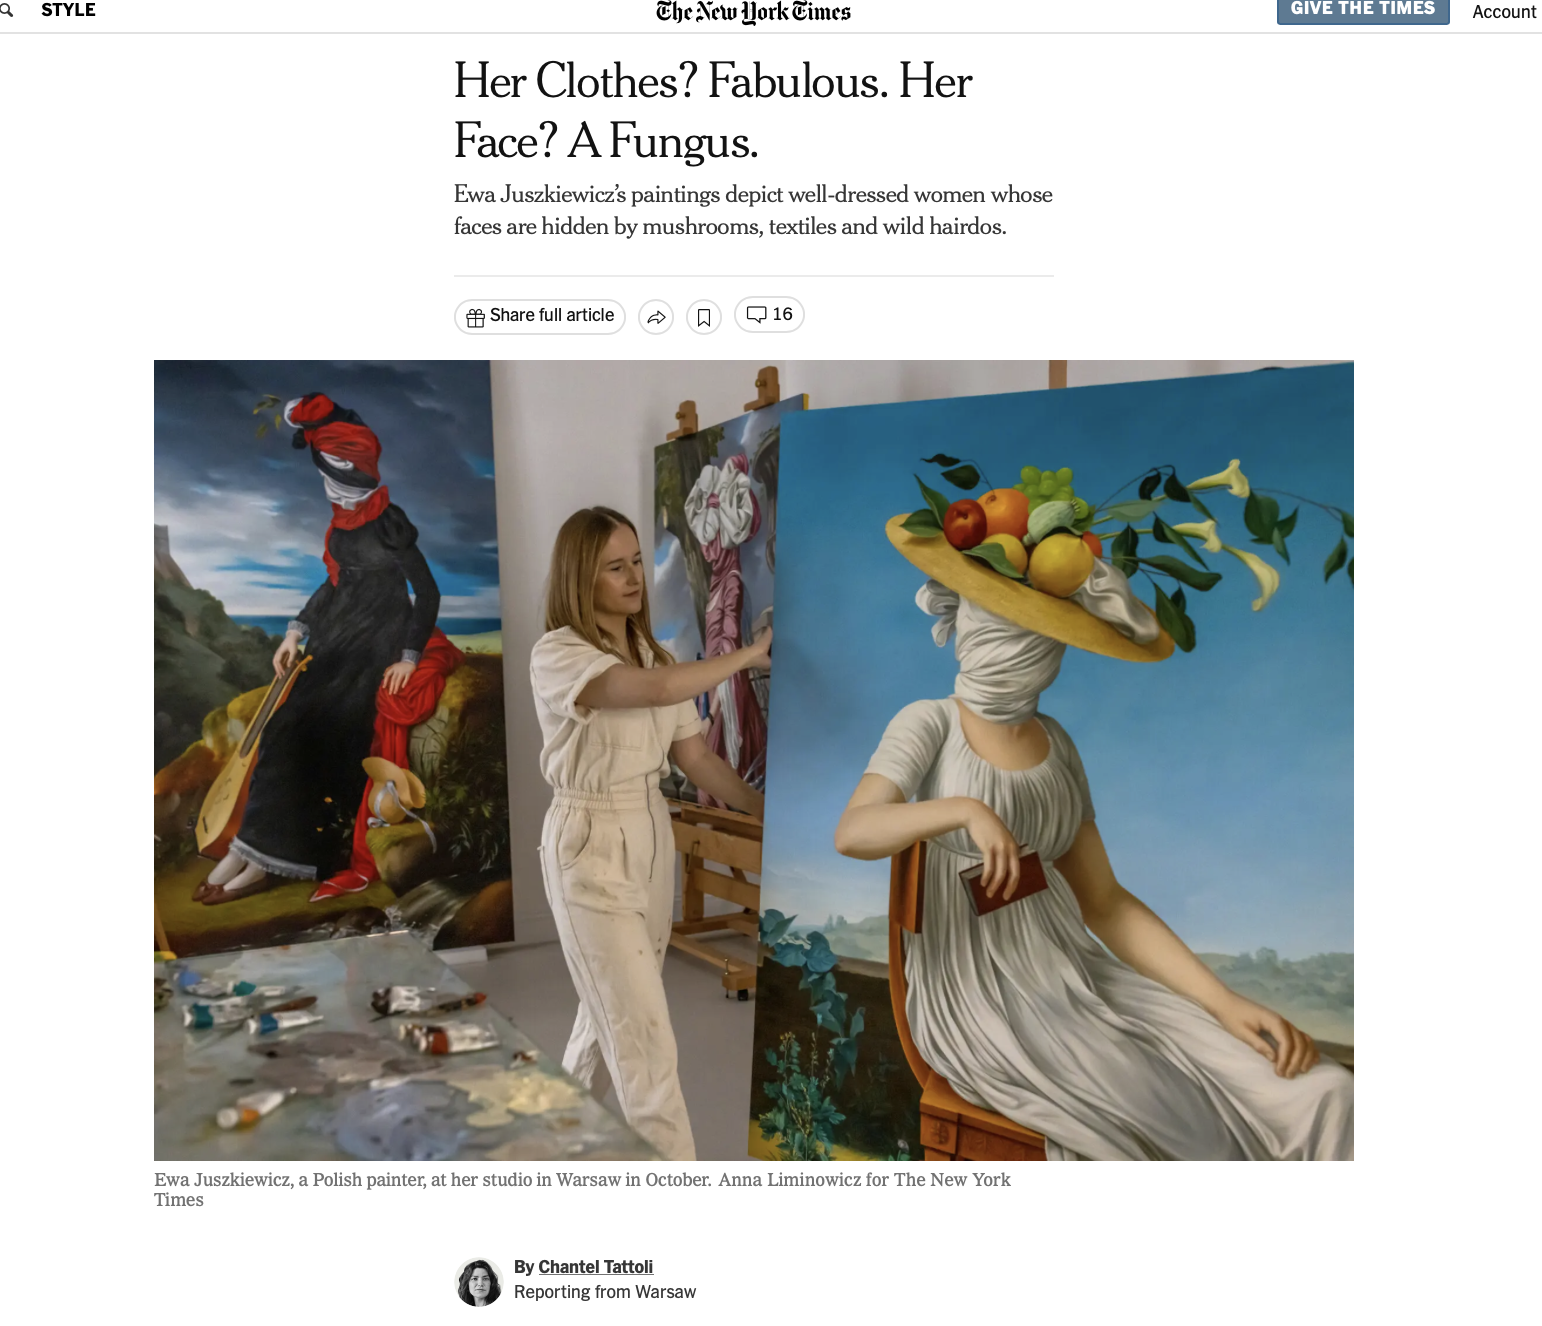 NYTIMES- Her Clothes? Fabulous. Her Face? A Fungus. - Photography story by Anna Liminowicz